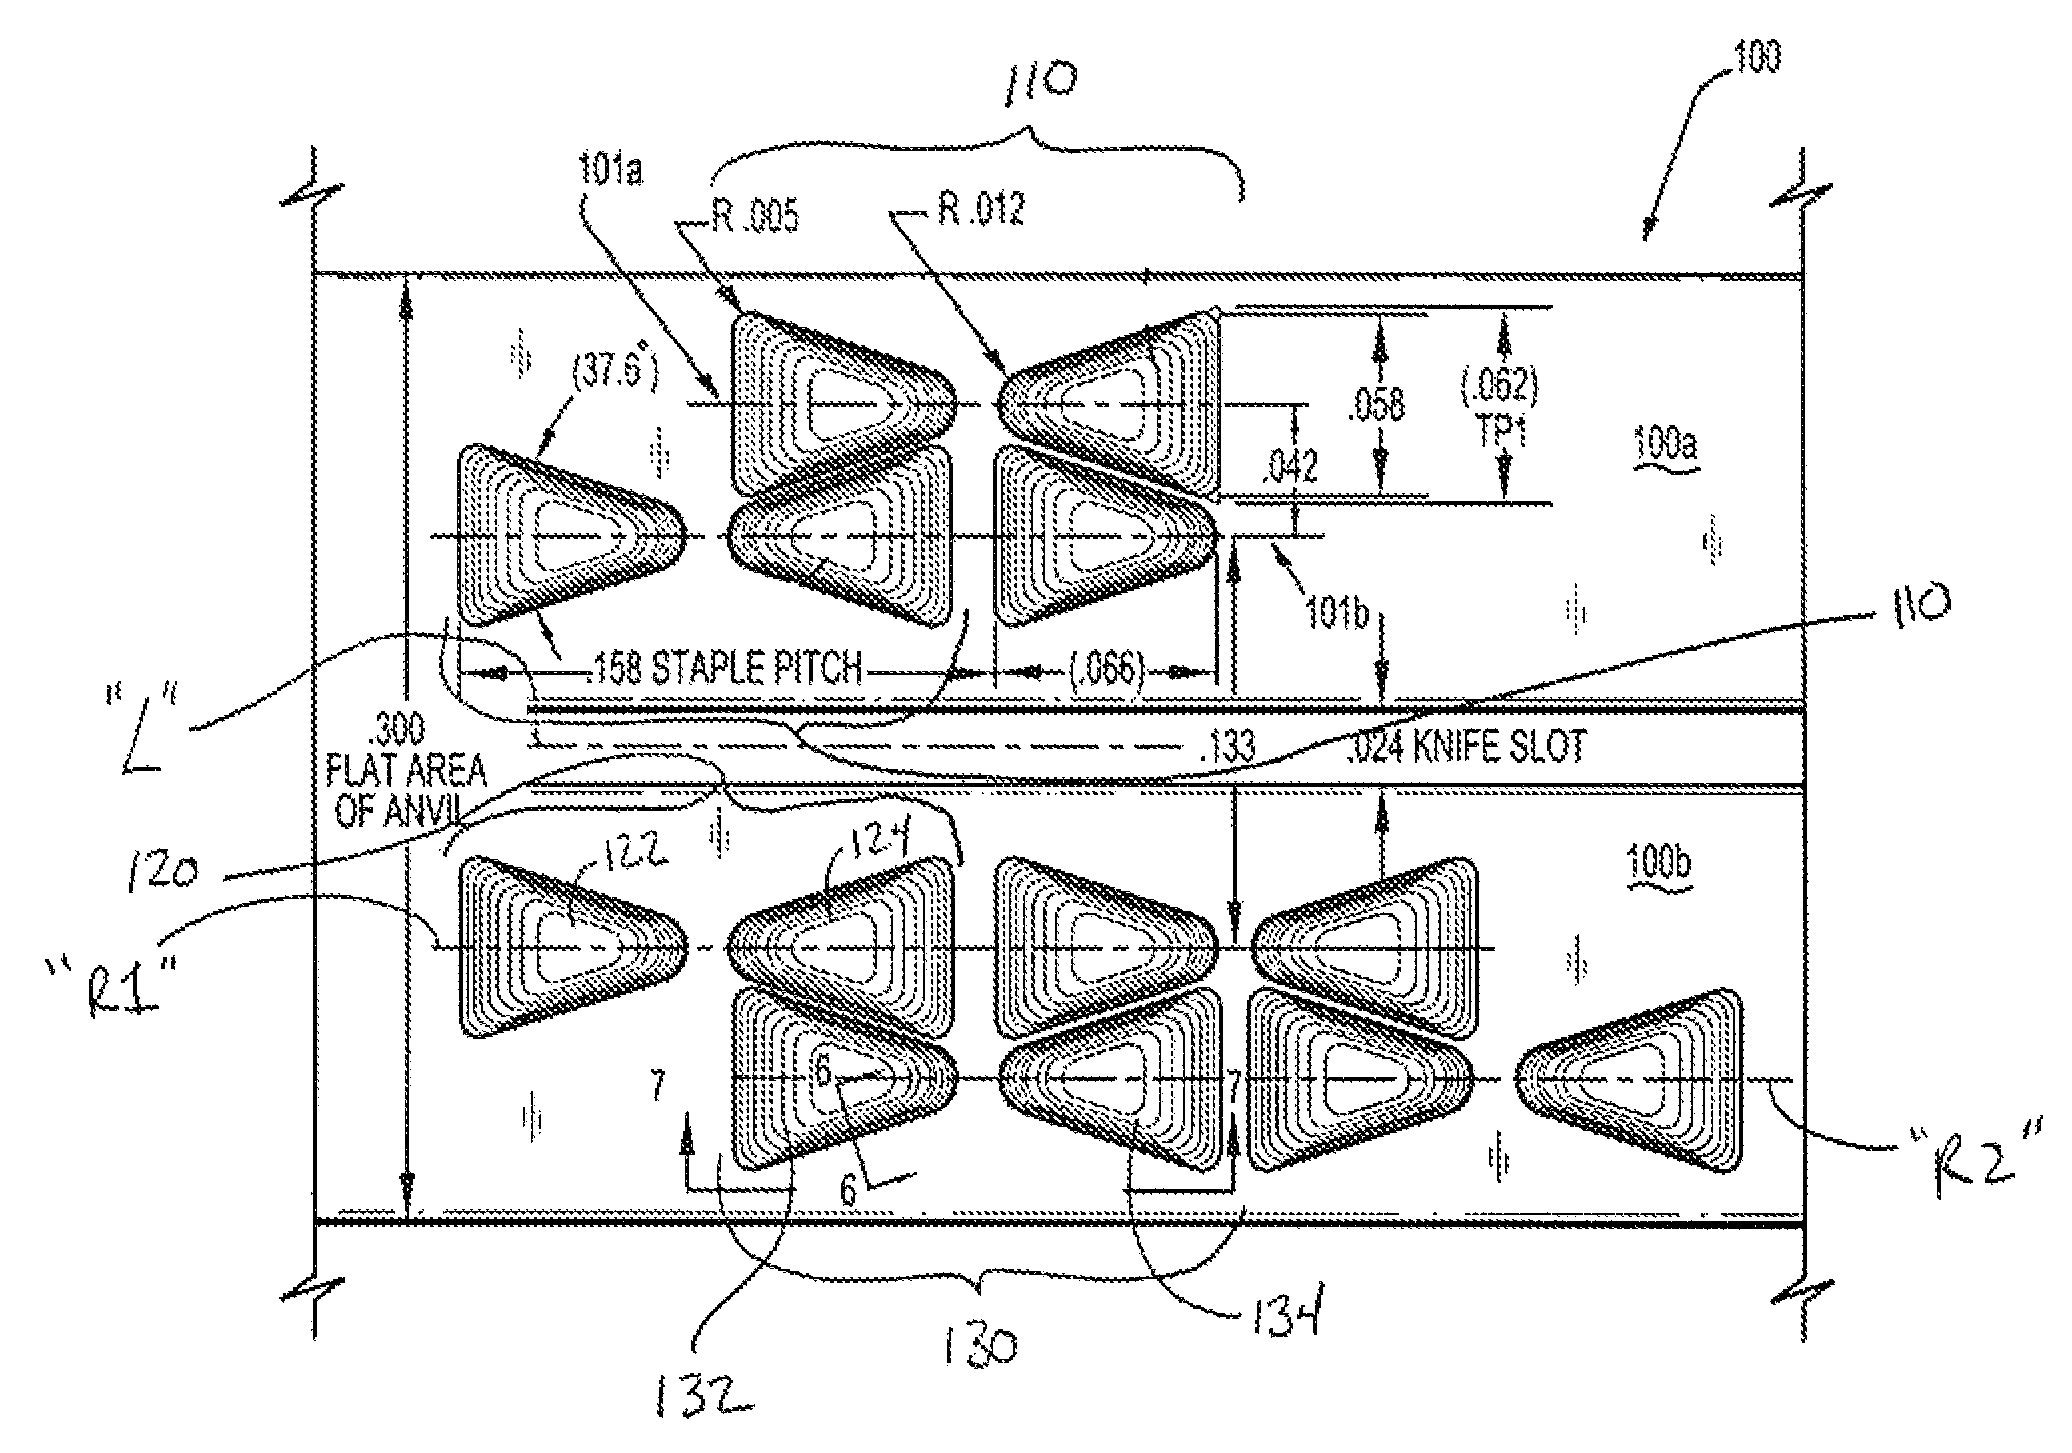 Method for forming staple pockets of a surgical stapler